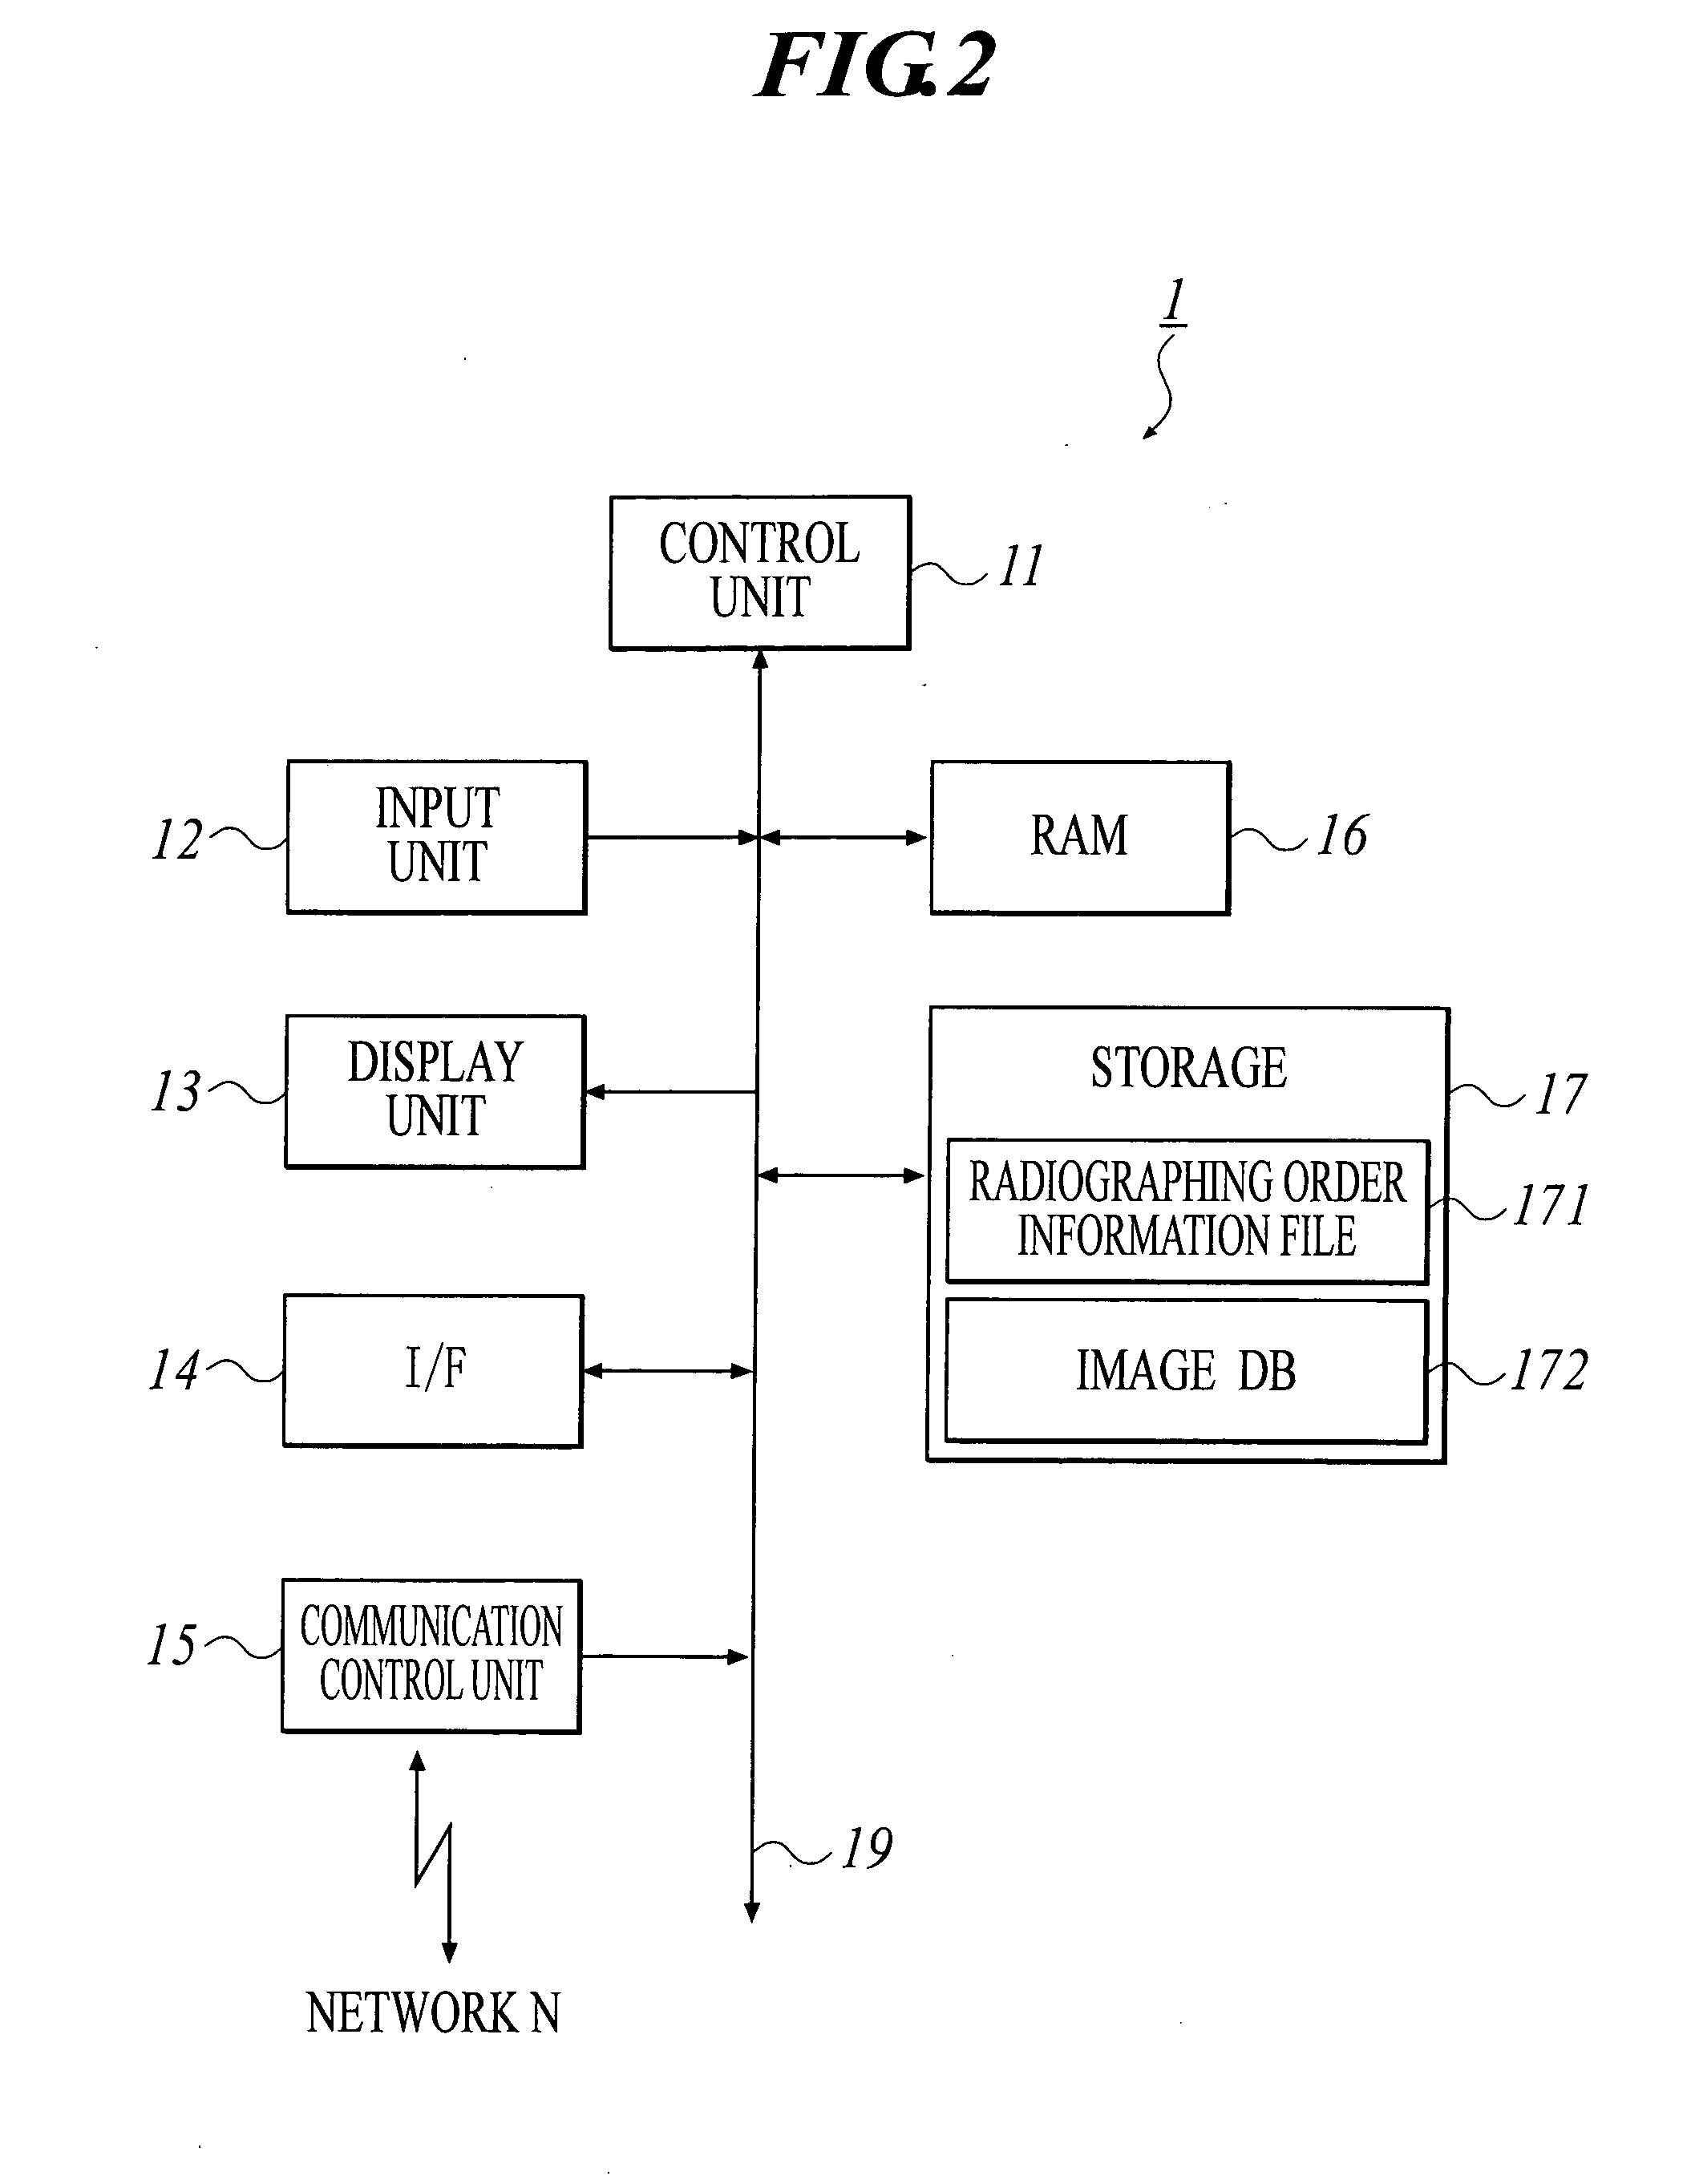 Medical image radiographing system, method for managing medical image and method for displaying medical image